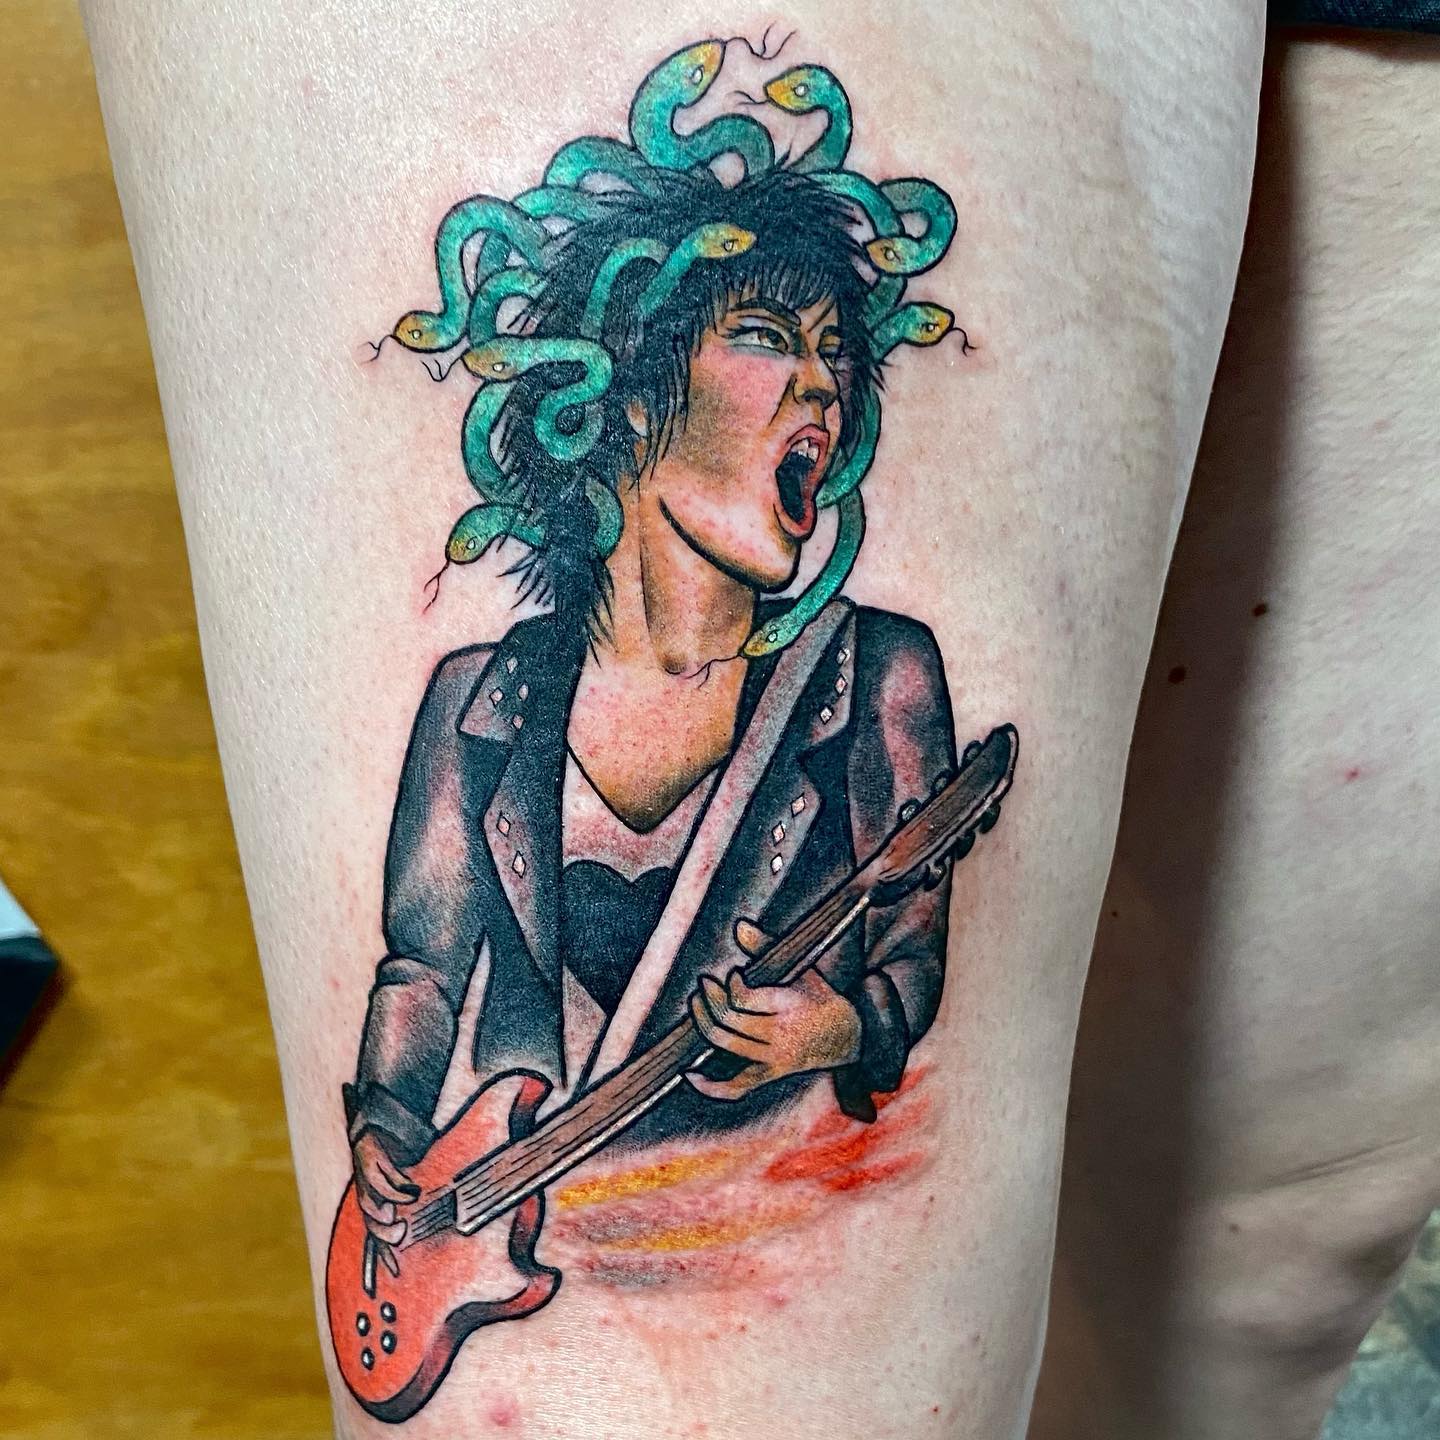 Creative tattoos are always a favorite, right? Rock goddess sounds quite sexy and in this tattoo, Medusa is a rock story and she is playing a bass guitar. With her black leather jacket, Medusa will give you a rock star feeling.